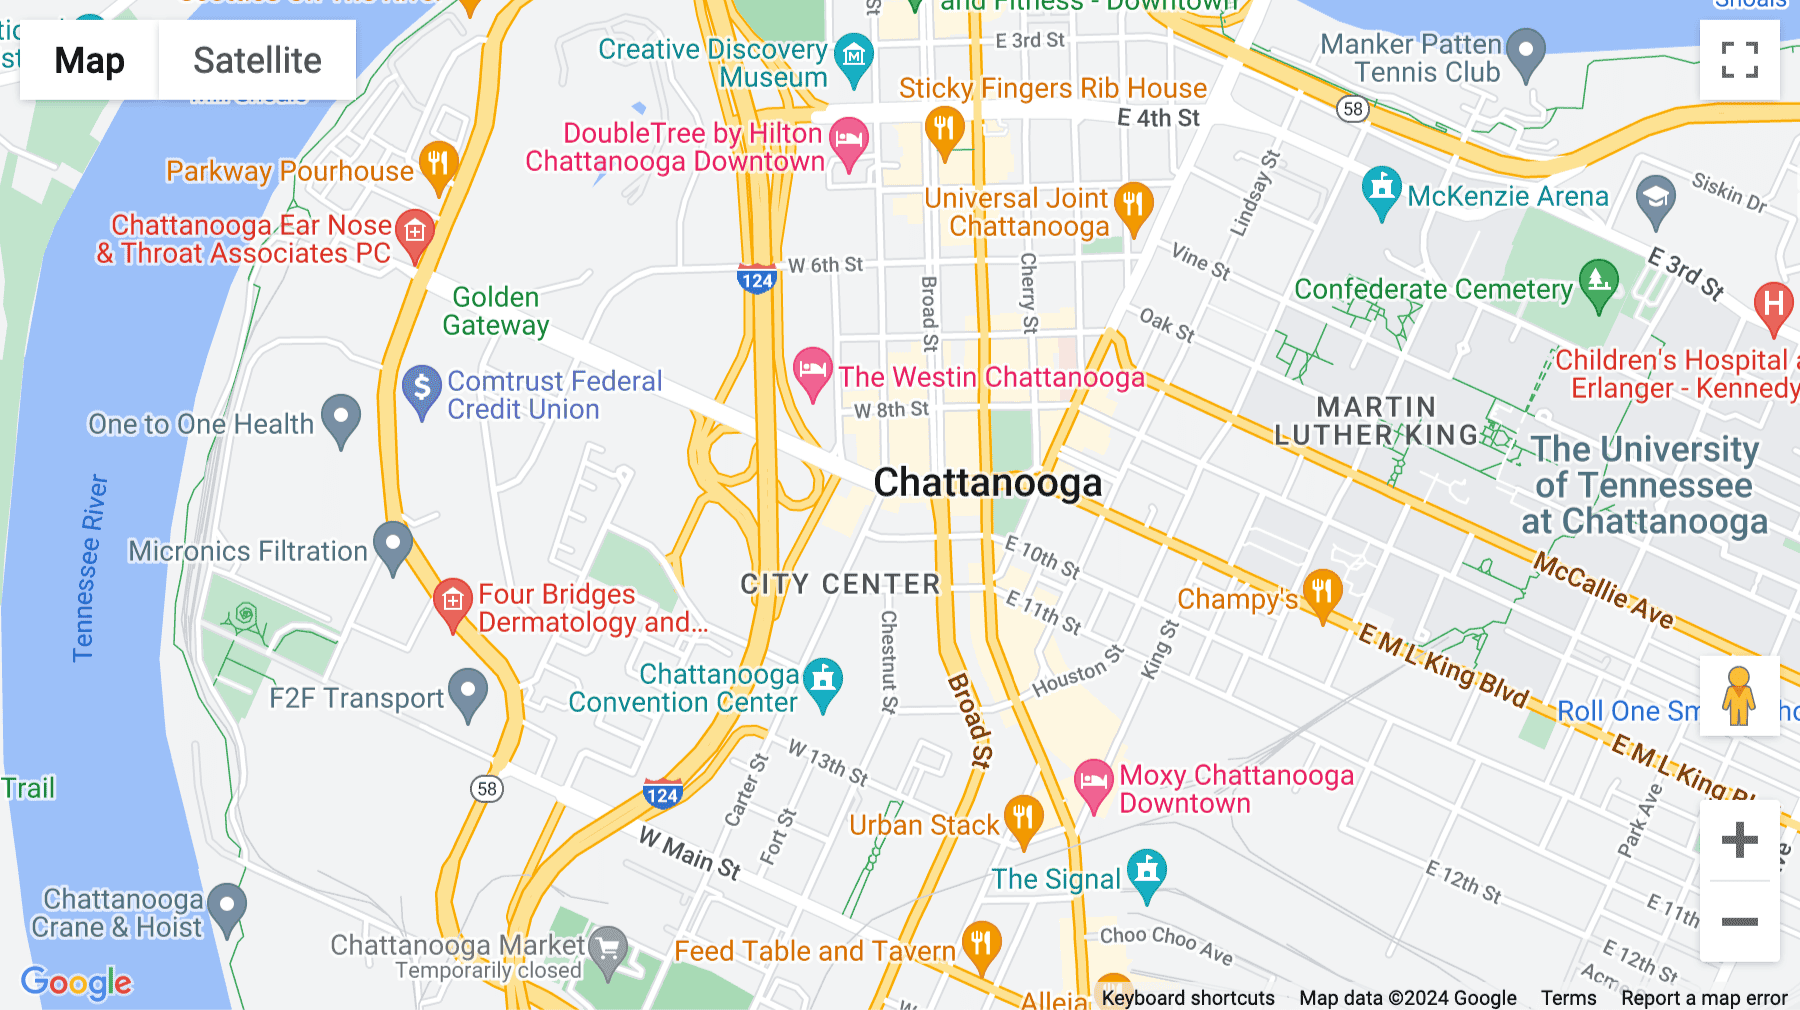 Click for interative map of 200 Martin Luther King Blvd, 10th Floor, Tallan Financial Business Centre, Chattanooga